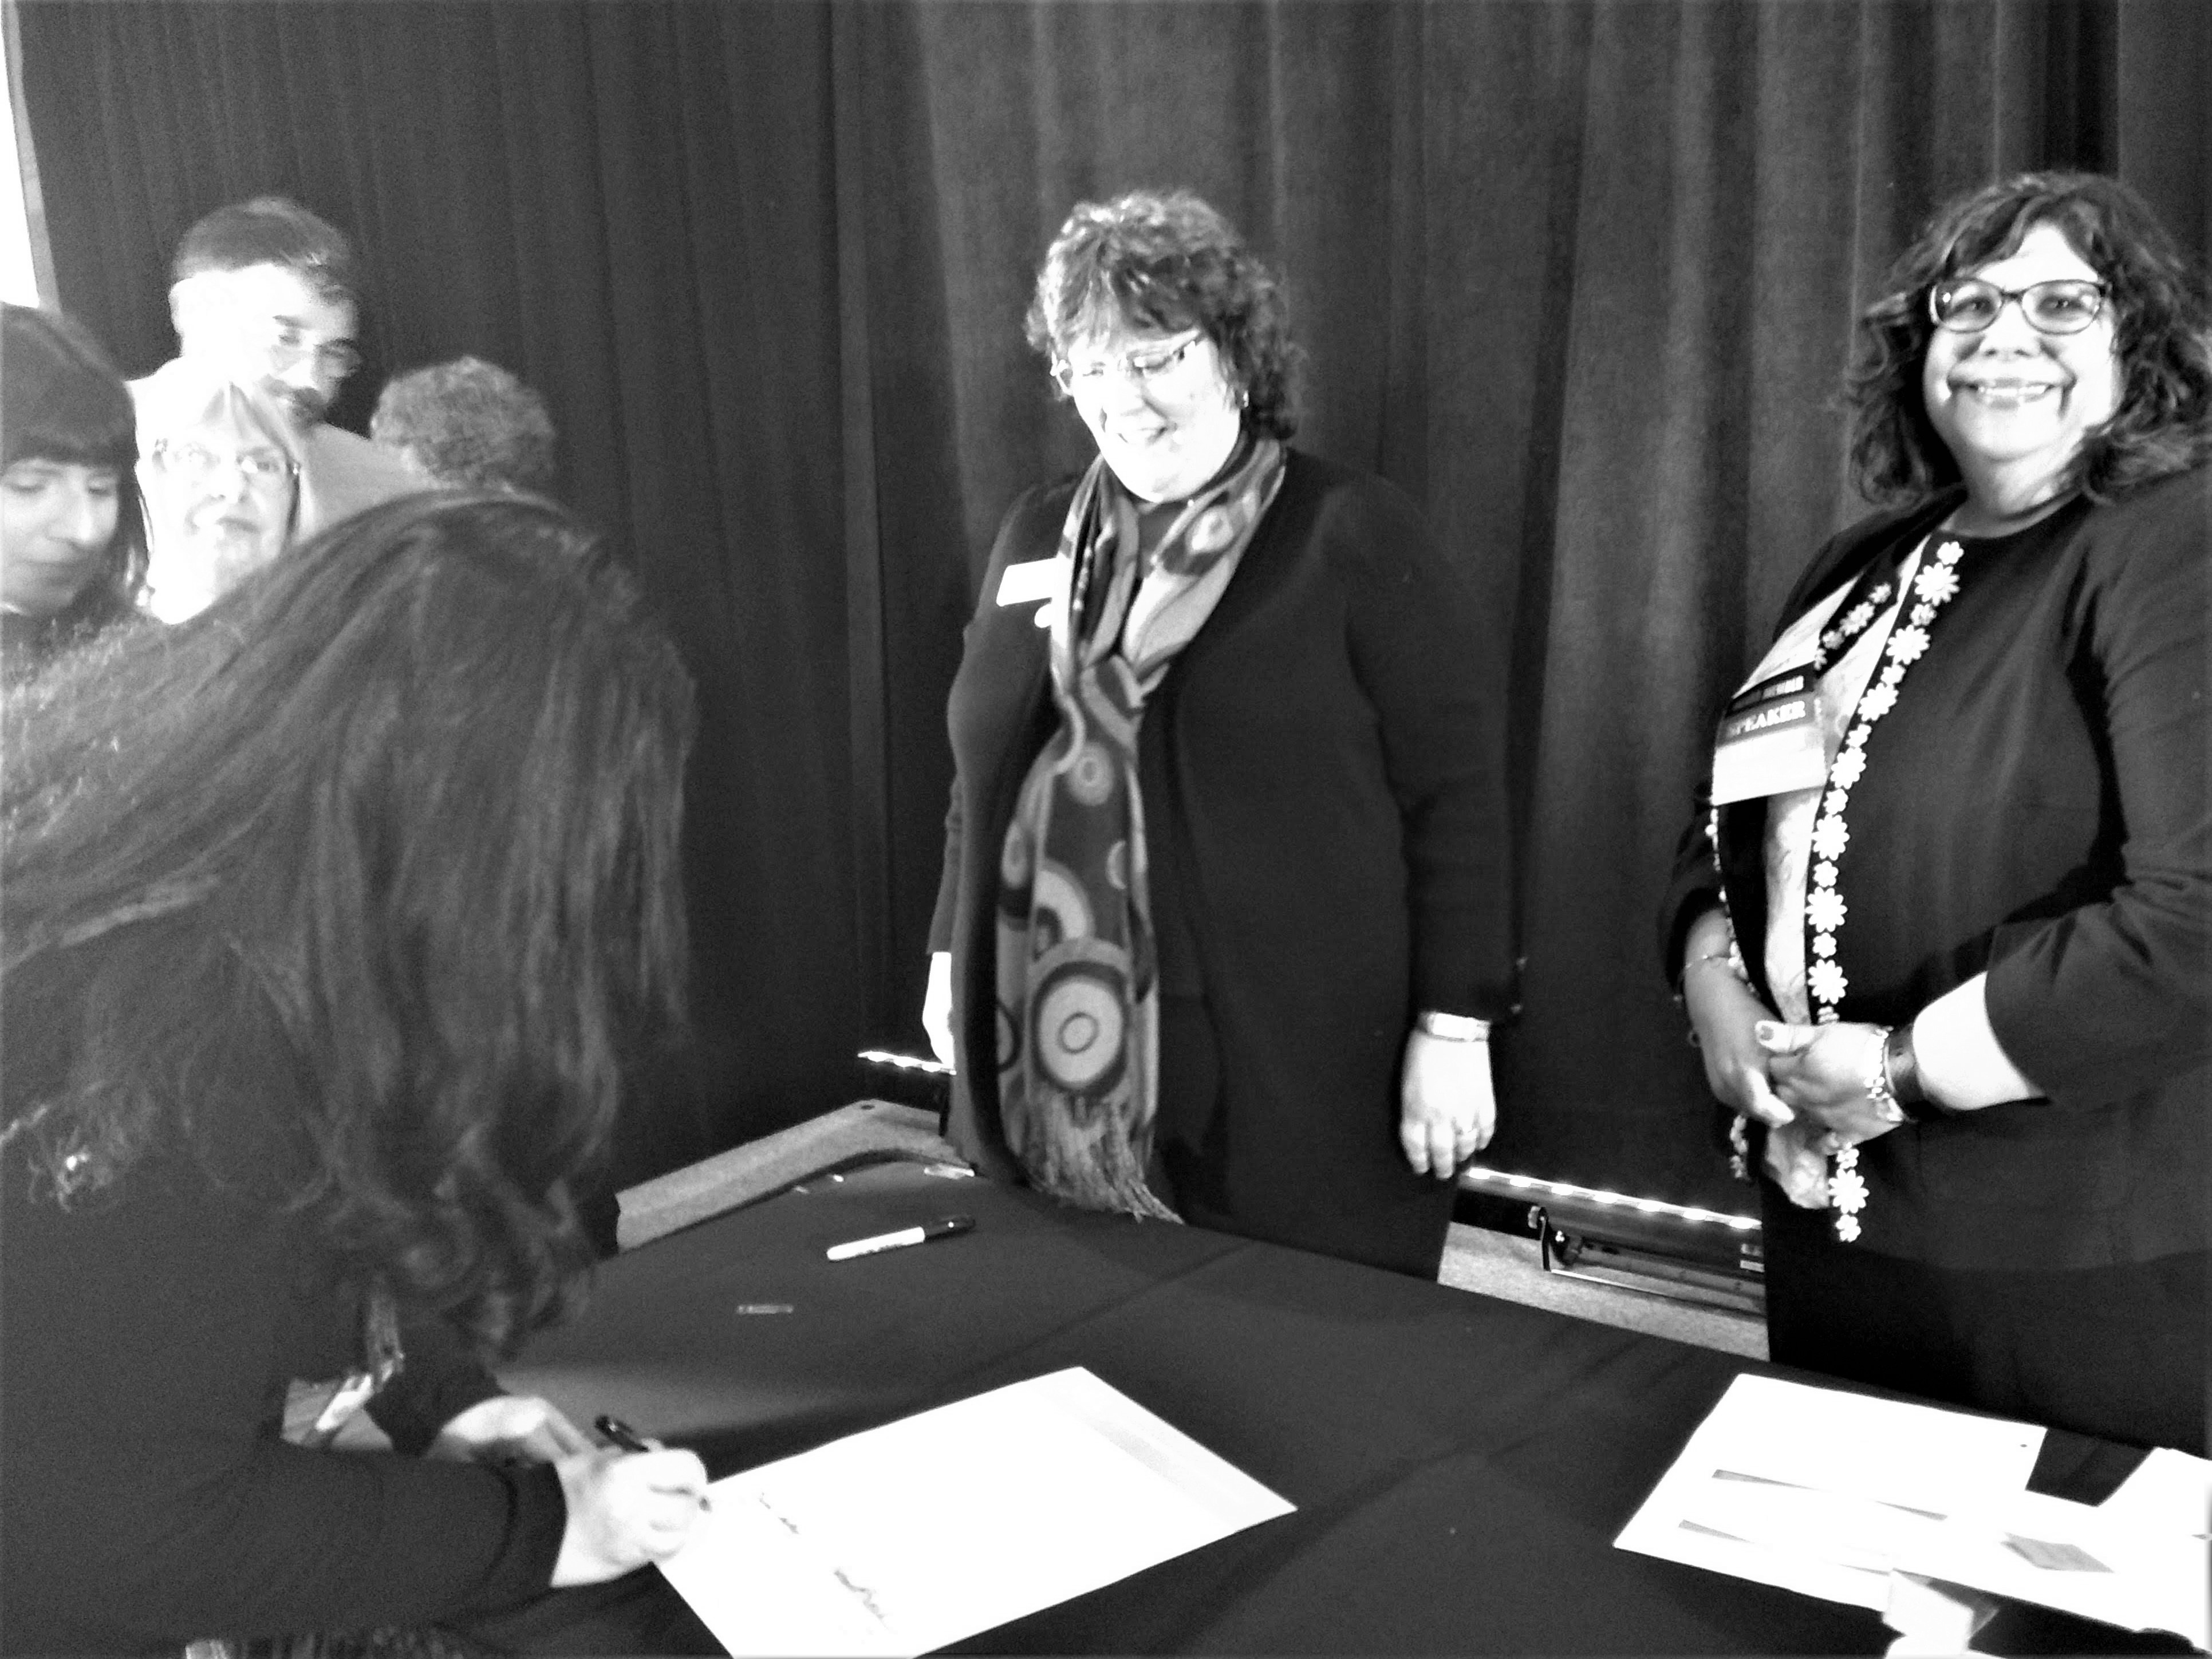 Members sign MLA Equity, Diversity and Inclusion statement on October 17, 2020 at the annual meeting during MLA 2020 Annual Conference at the Suburban Collection Showplace in Novi, MI.